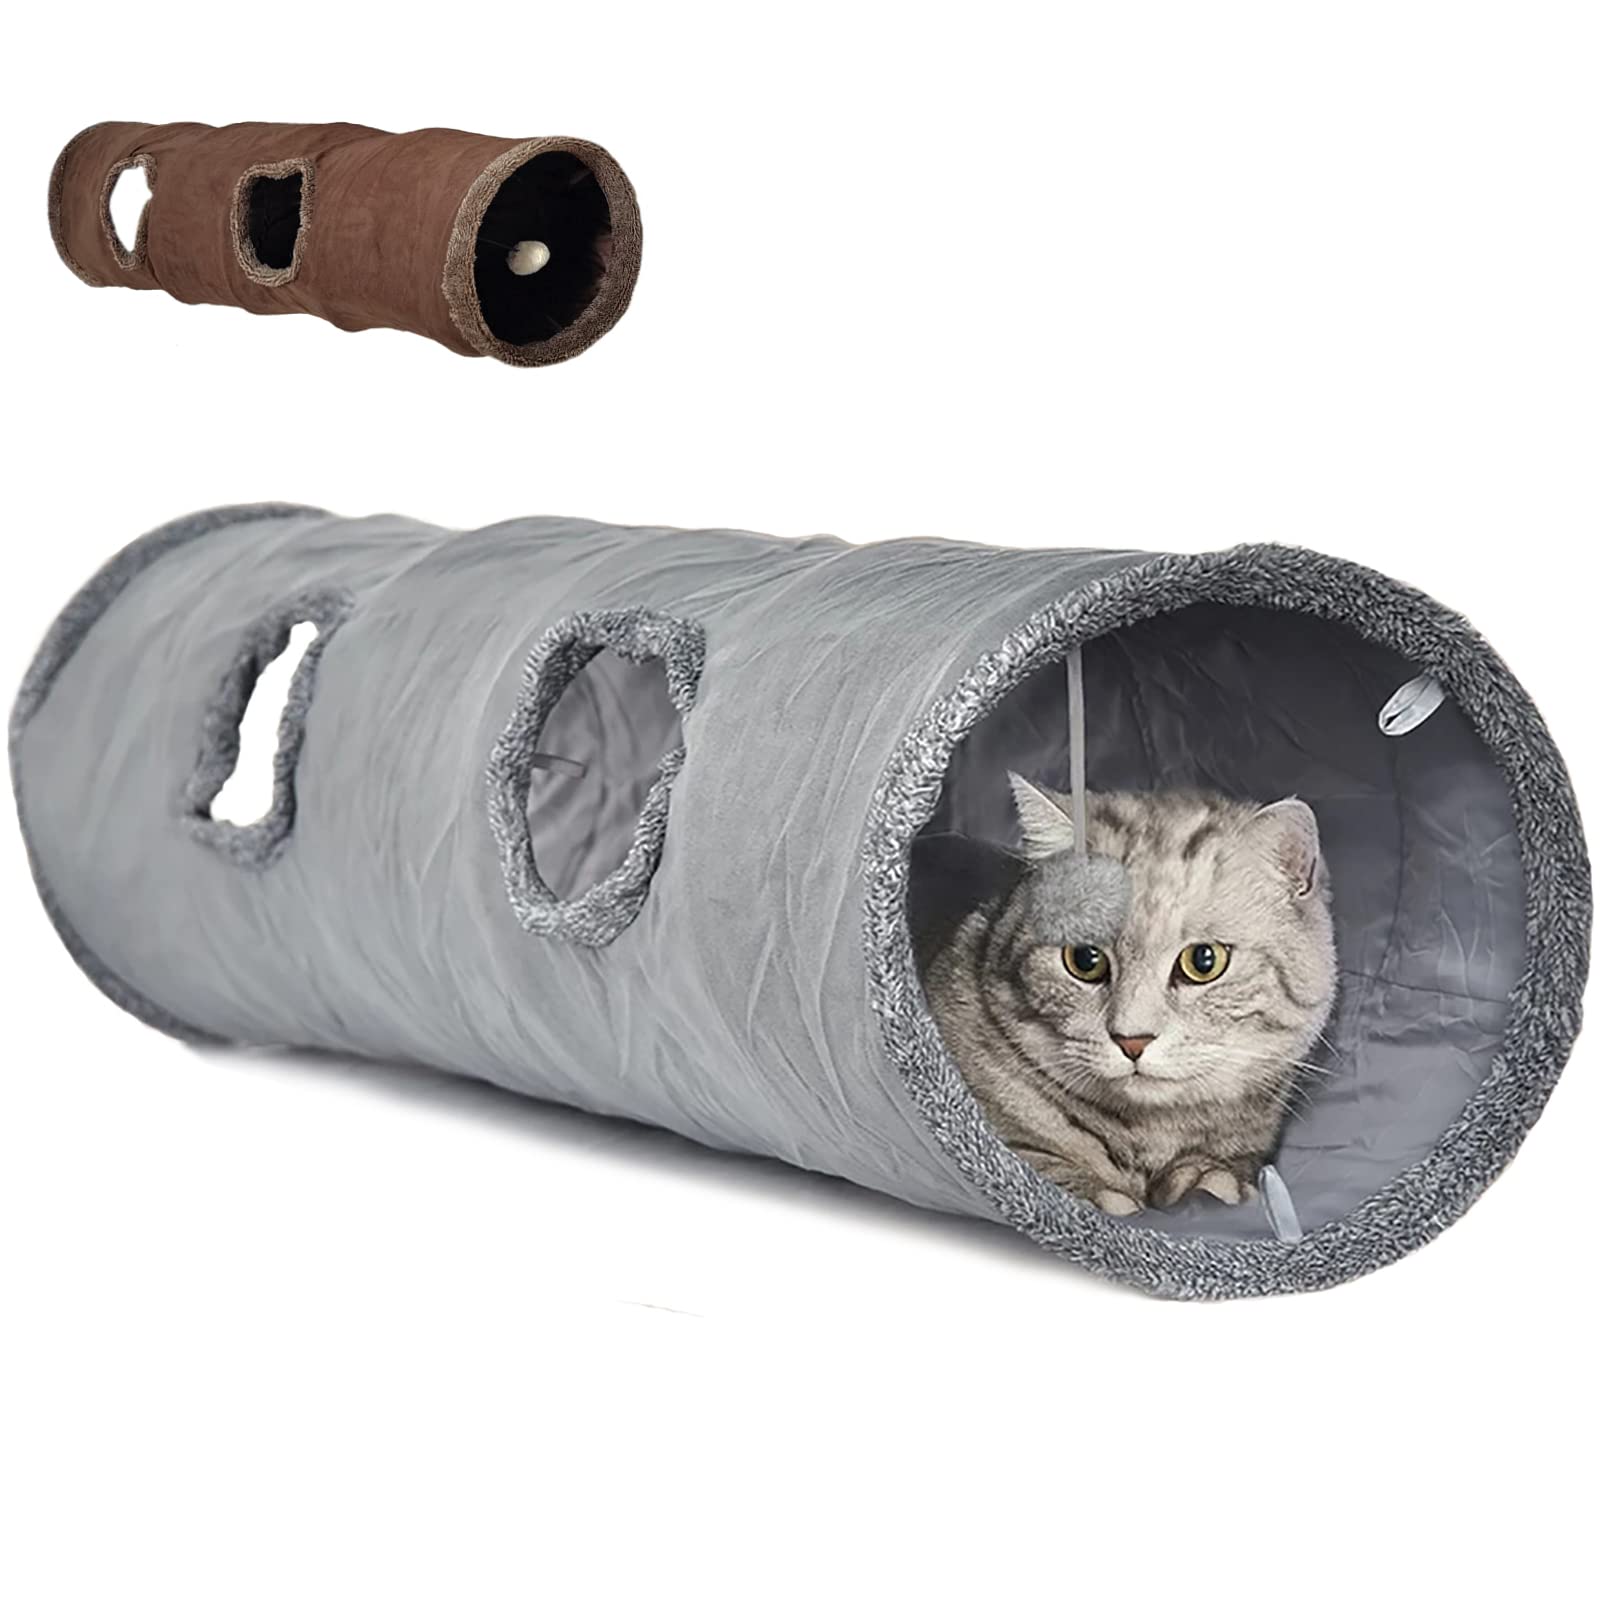 LeerKing cat Tunnel 12 x 51 inch collapsible Pet cat Play Tunnel Hideaway with Ball crinkle cat Tunnels for Indoor cats Kitties 